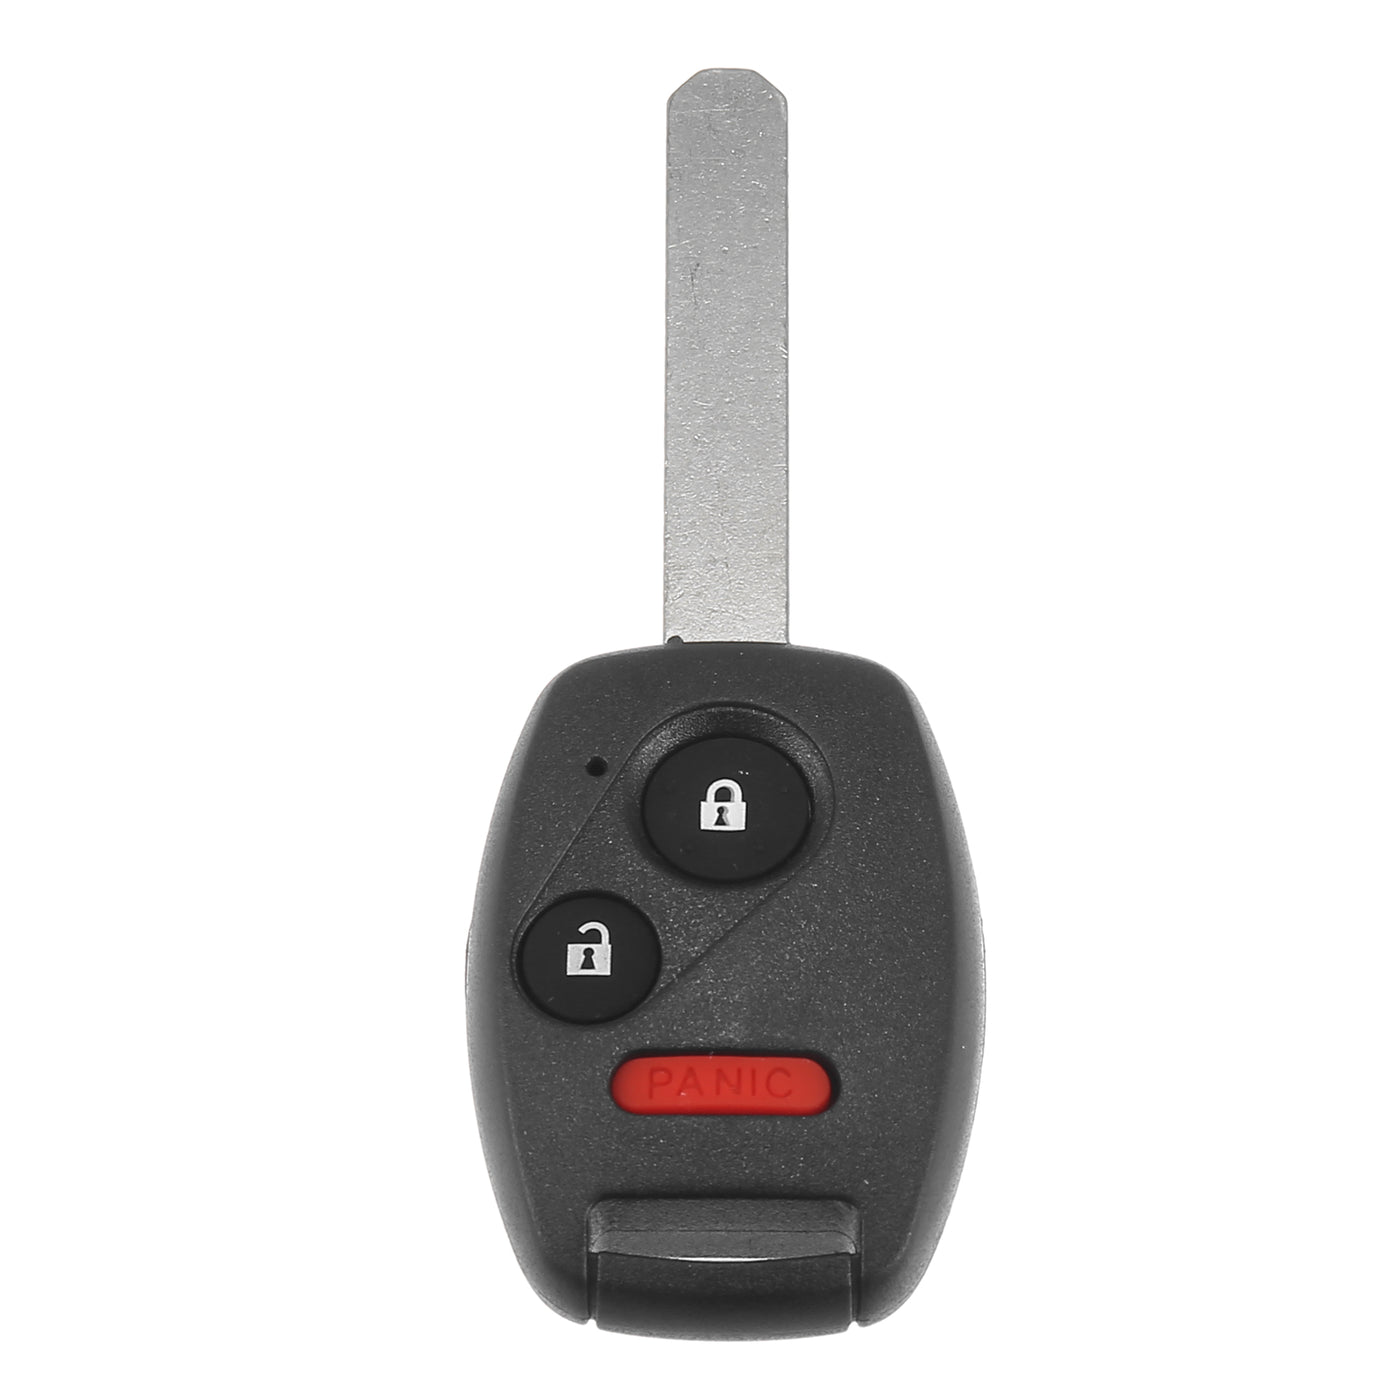 X AUTOHAUX 313.8MHz MLBHLIK-1T Replacement Smart Proximity Keyless Entry Remote Key Fob for Honda CR-V CR-Z Fit Insight Accord Crosstour 3 Buttons with Door Key 46 Chip